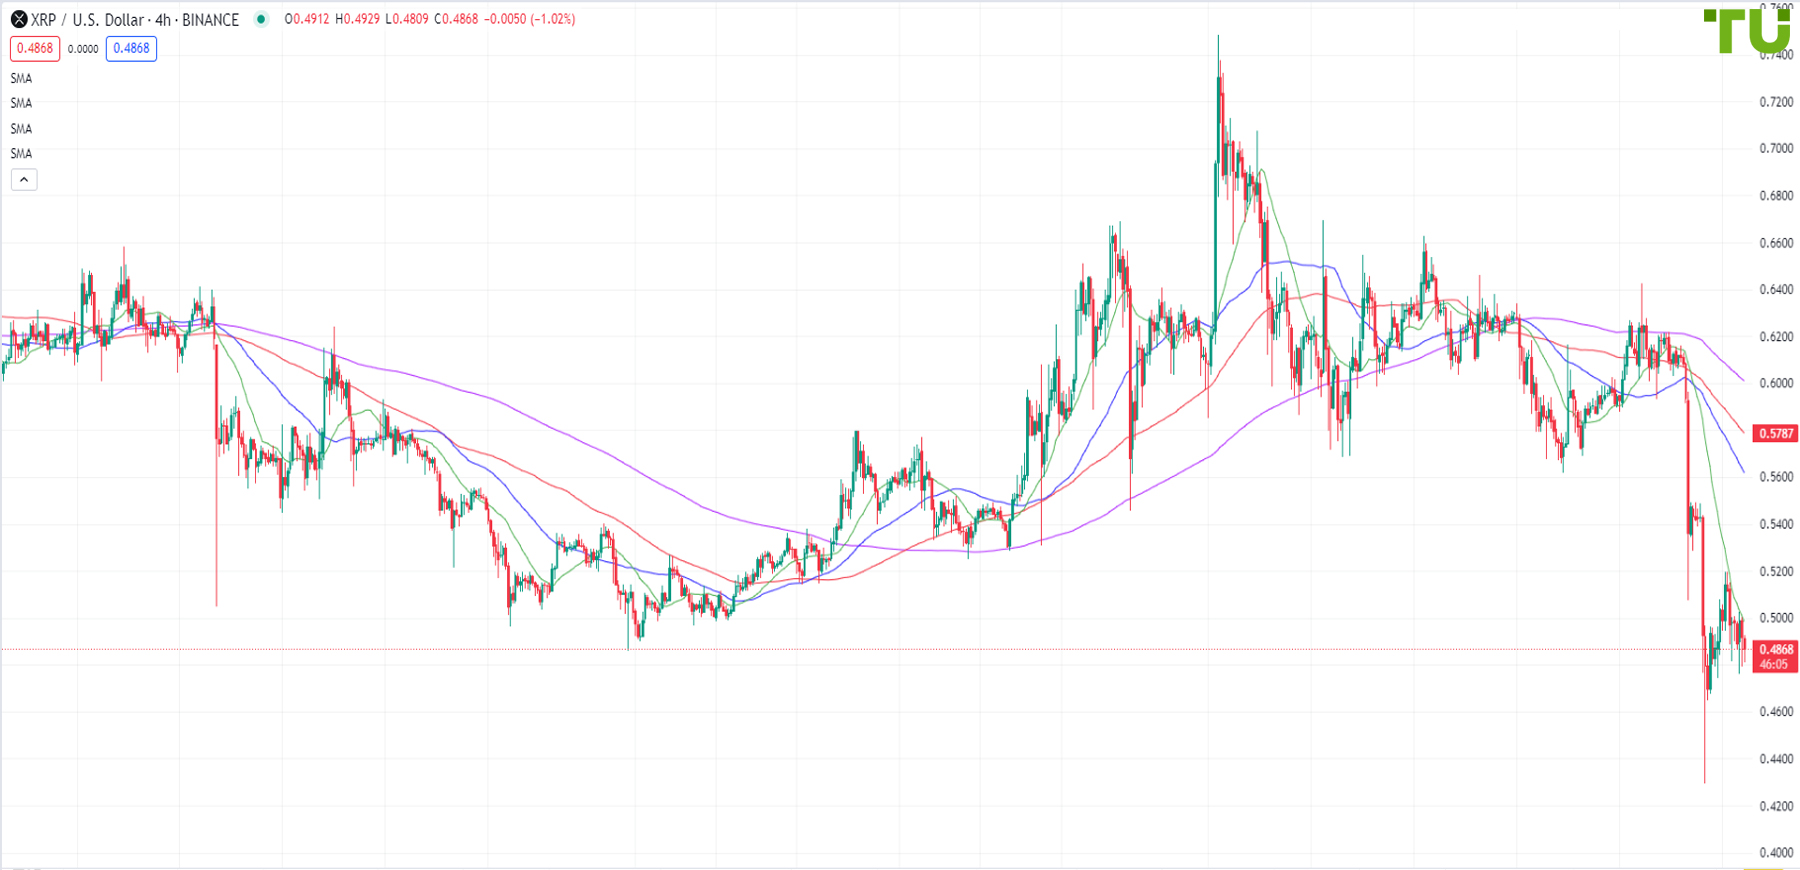 XRP/USD collapsed to 0.4300